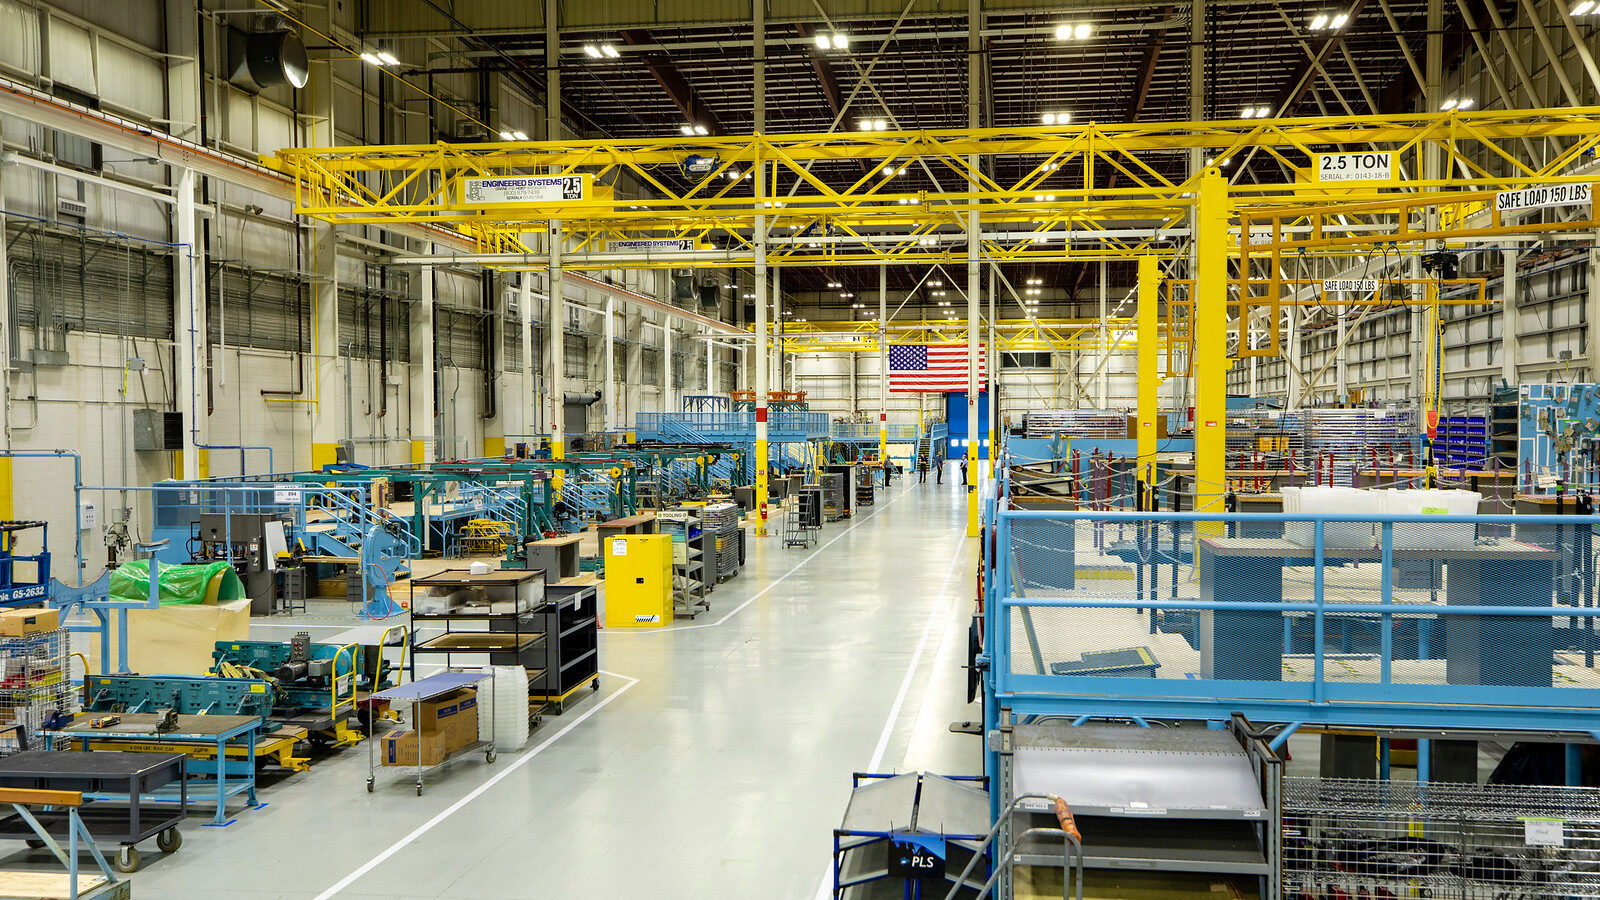 COVID supply chain woes add yearlong delay to first F-16 rollout at new facility